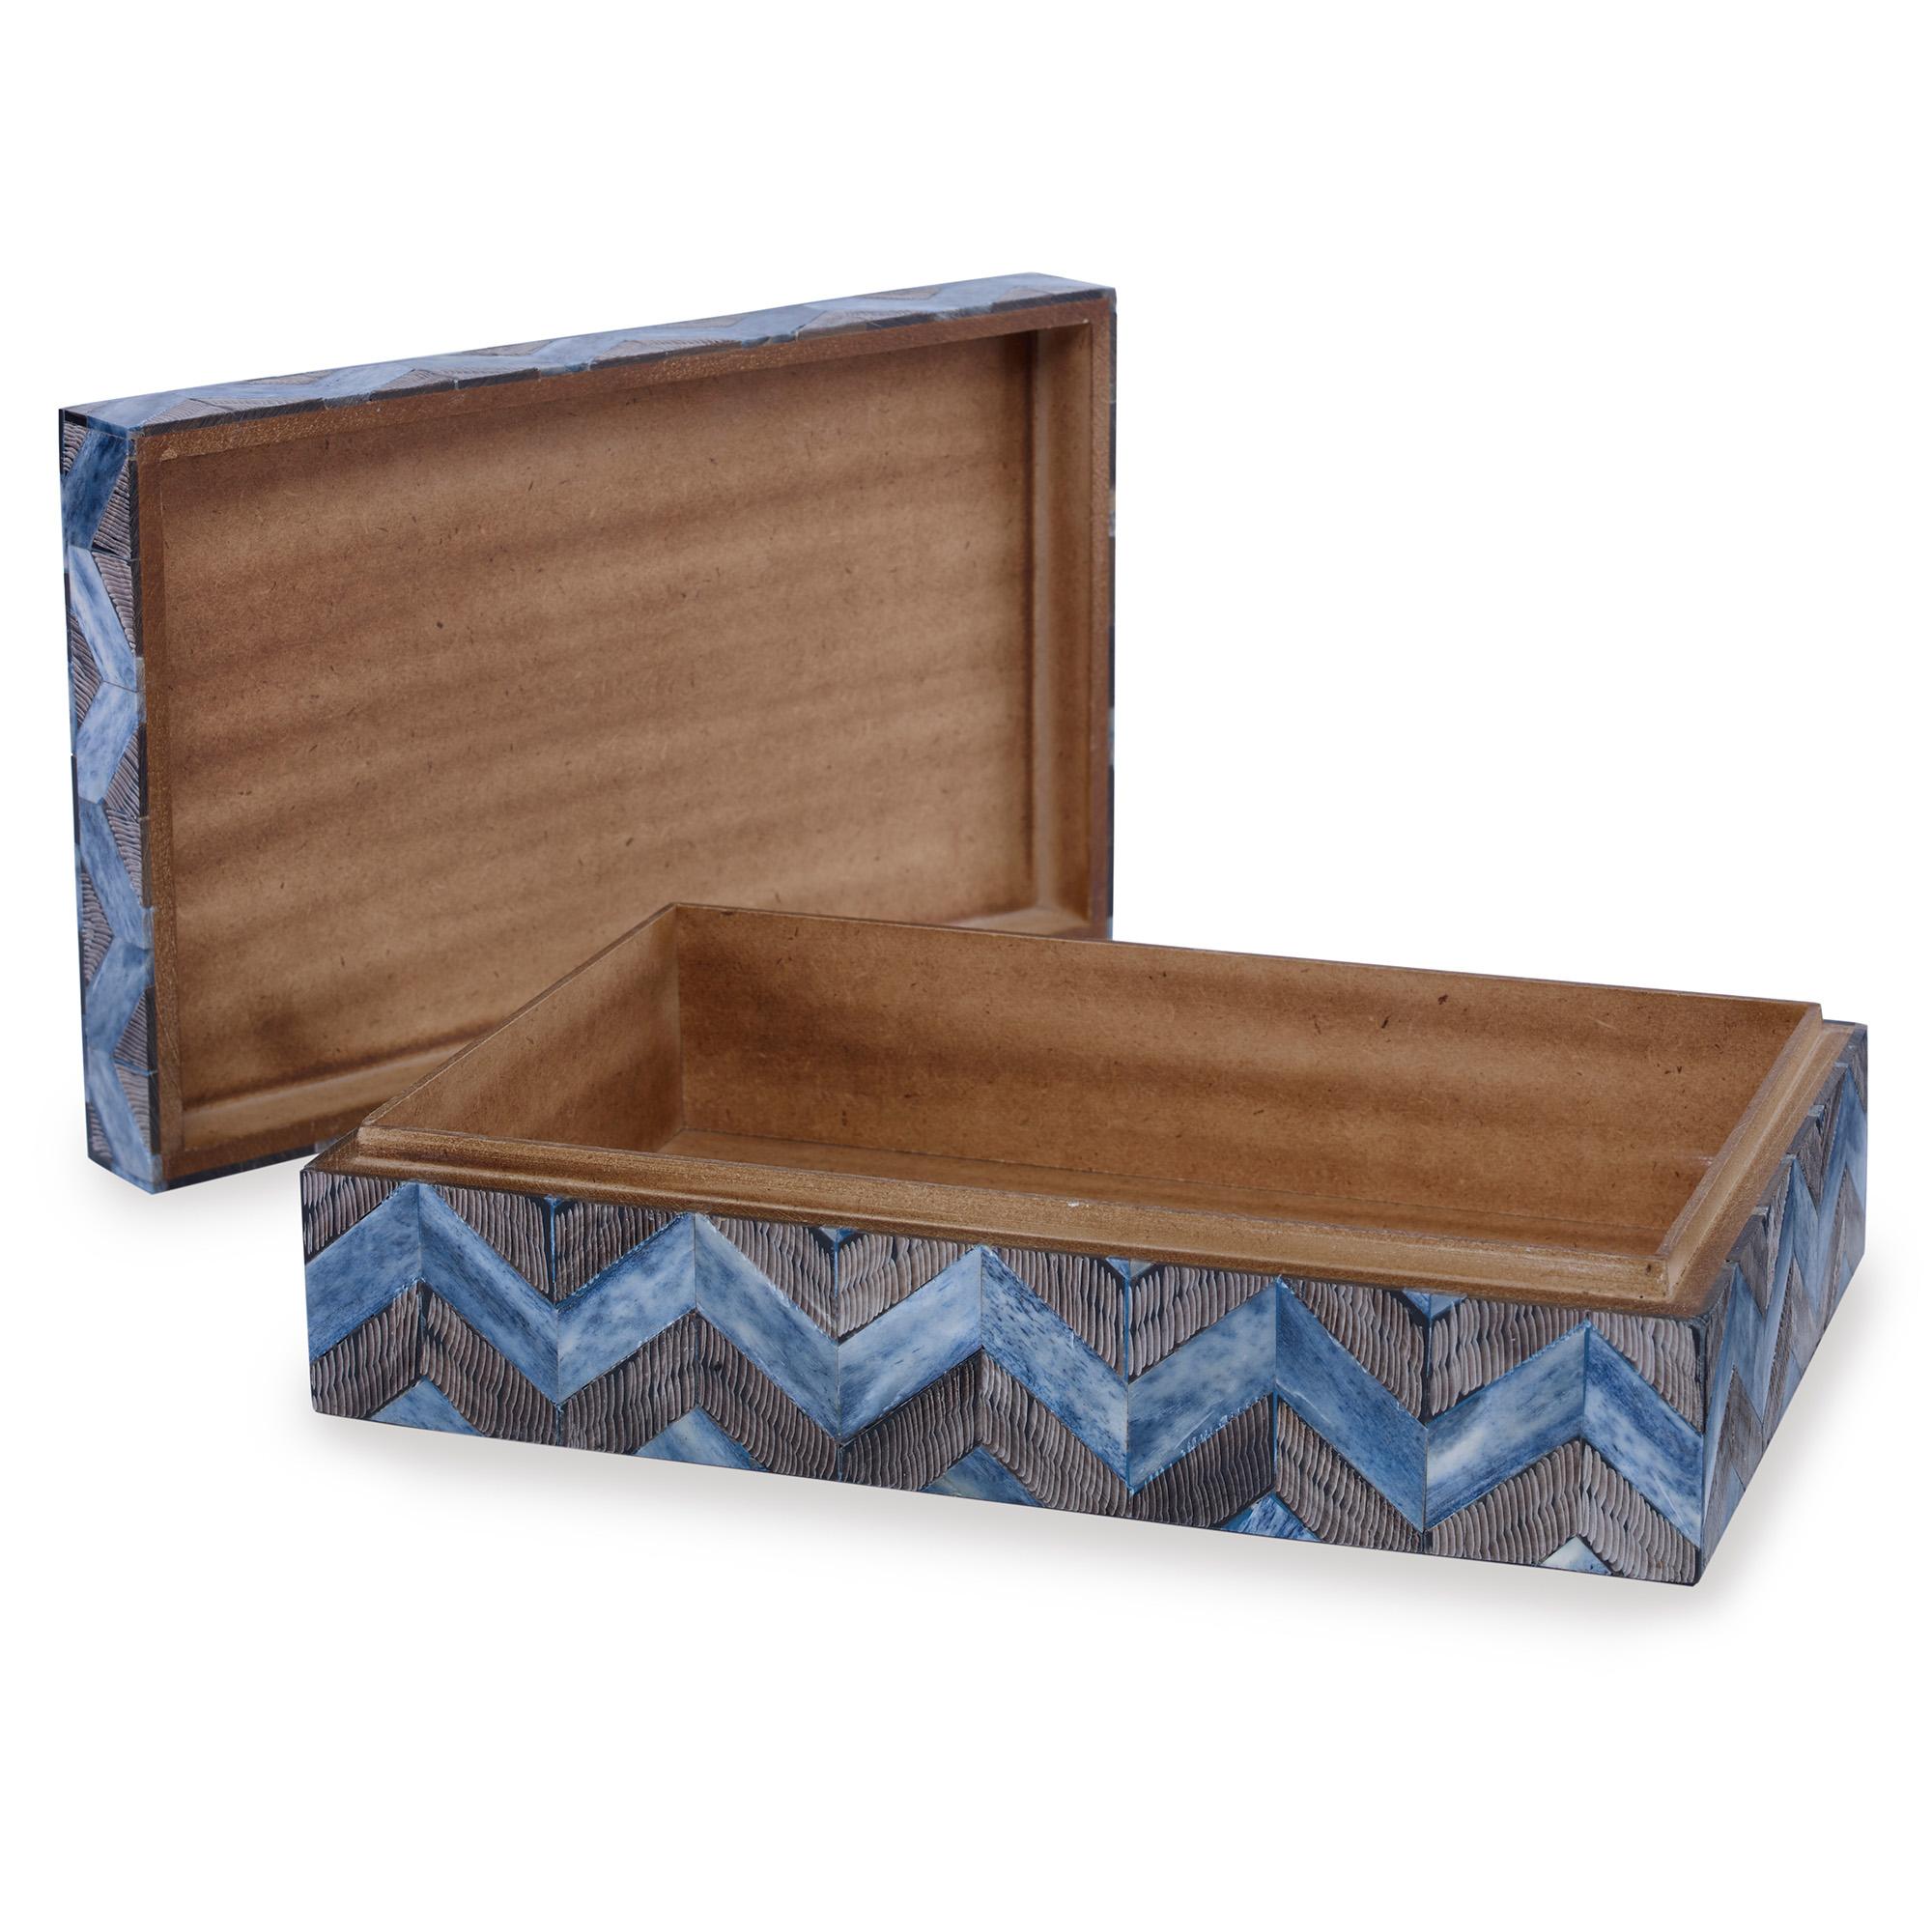 Modern Bethel Decorative Box in Zigzag Pattern Made with Bone and Horn by CuratedKravet